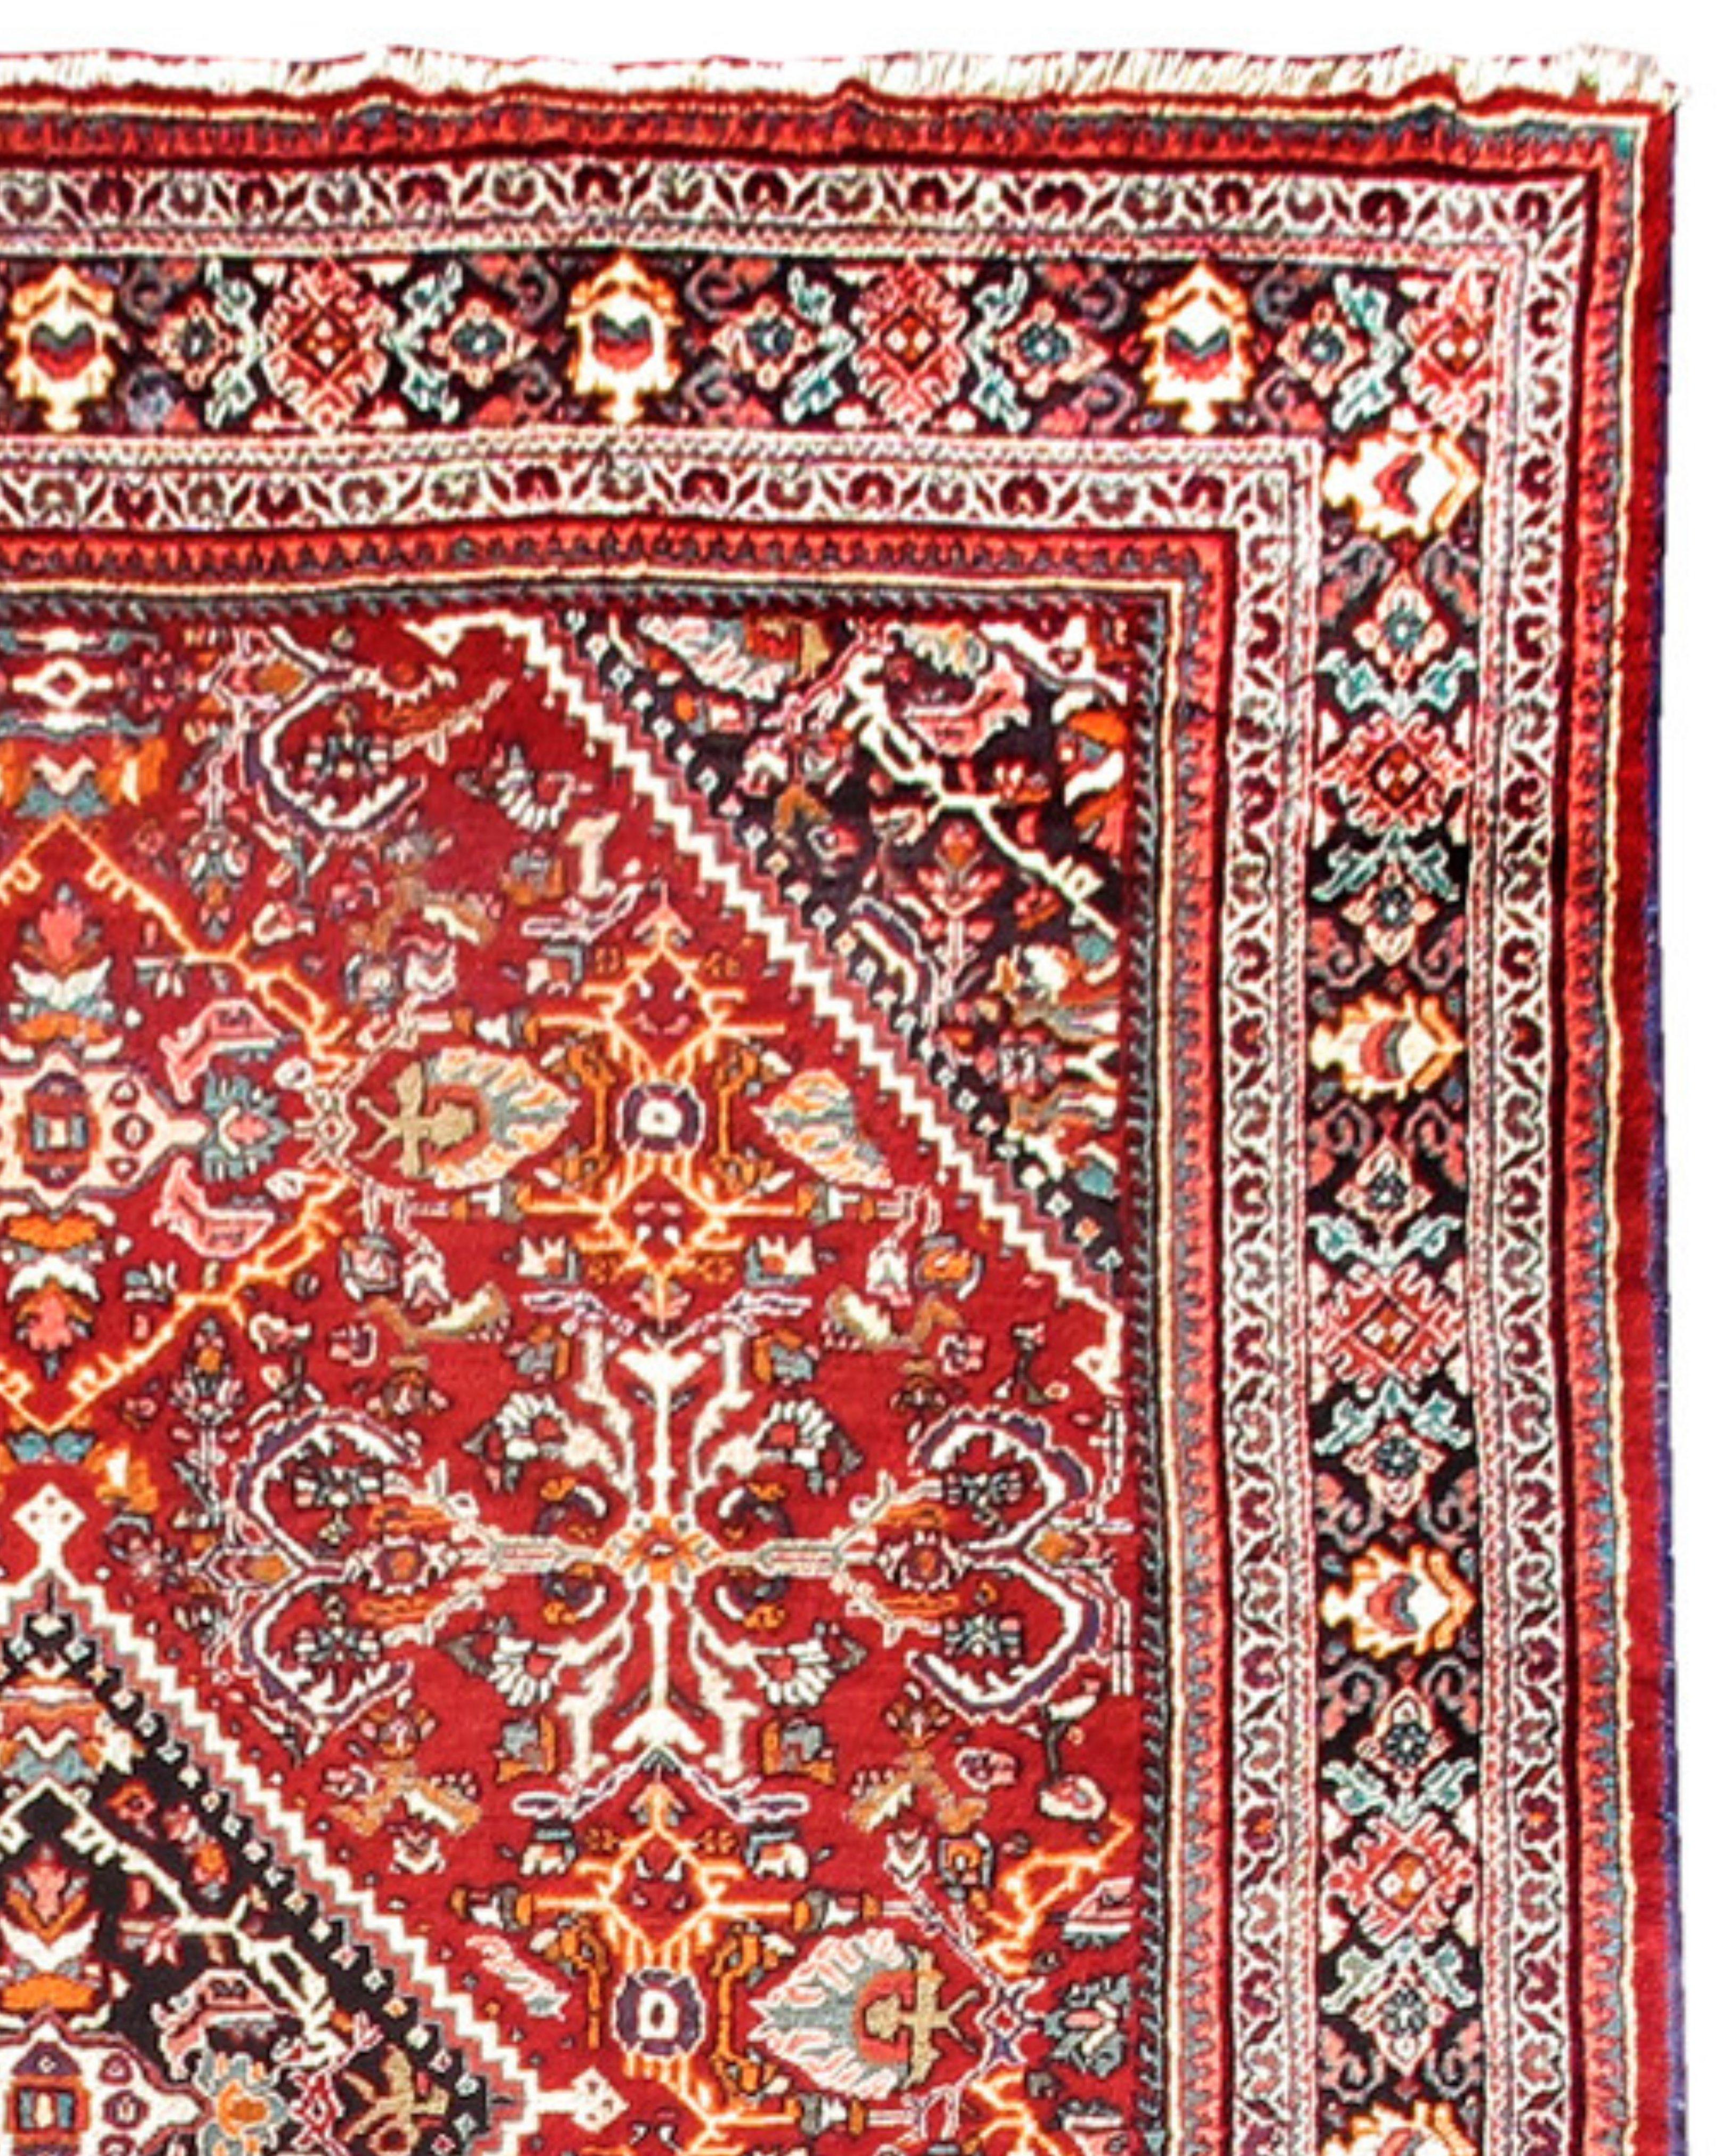 Mahal Carpet, 20th Century

Additional Information:
Dimensions: 10'10